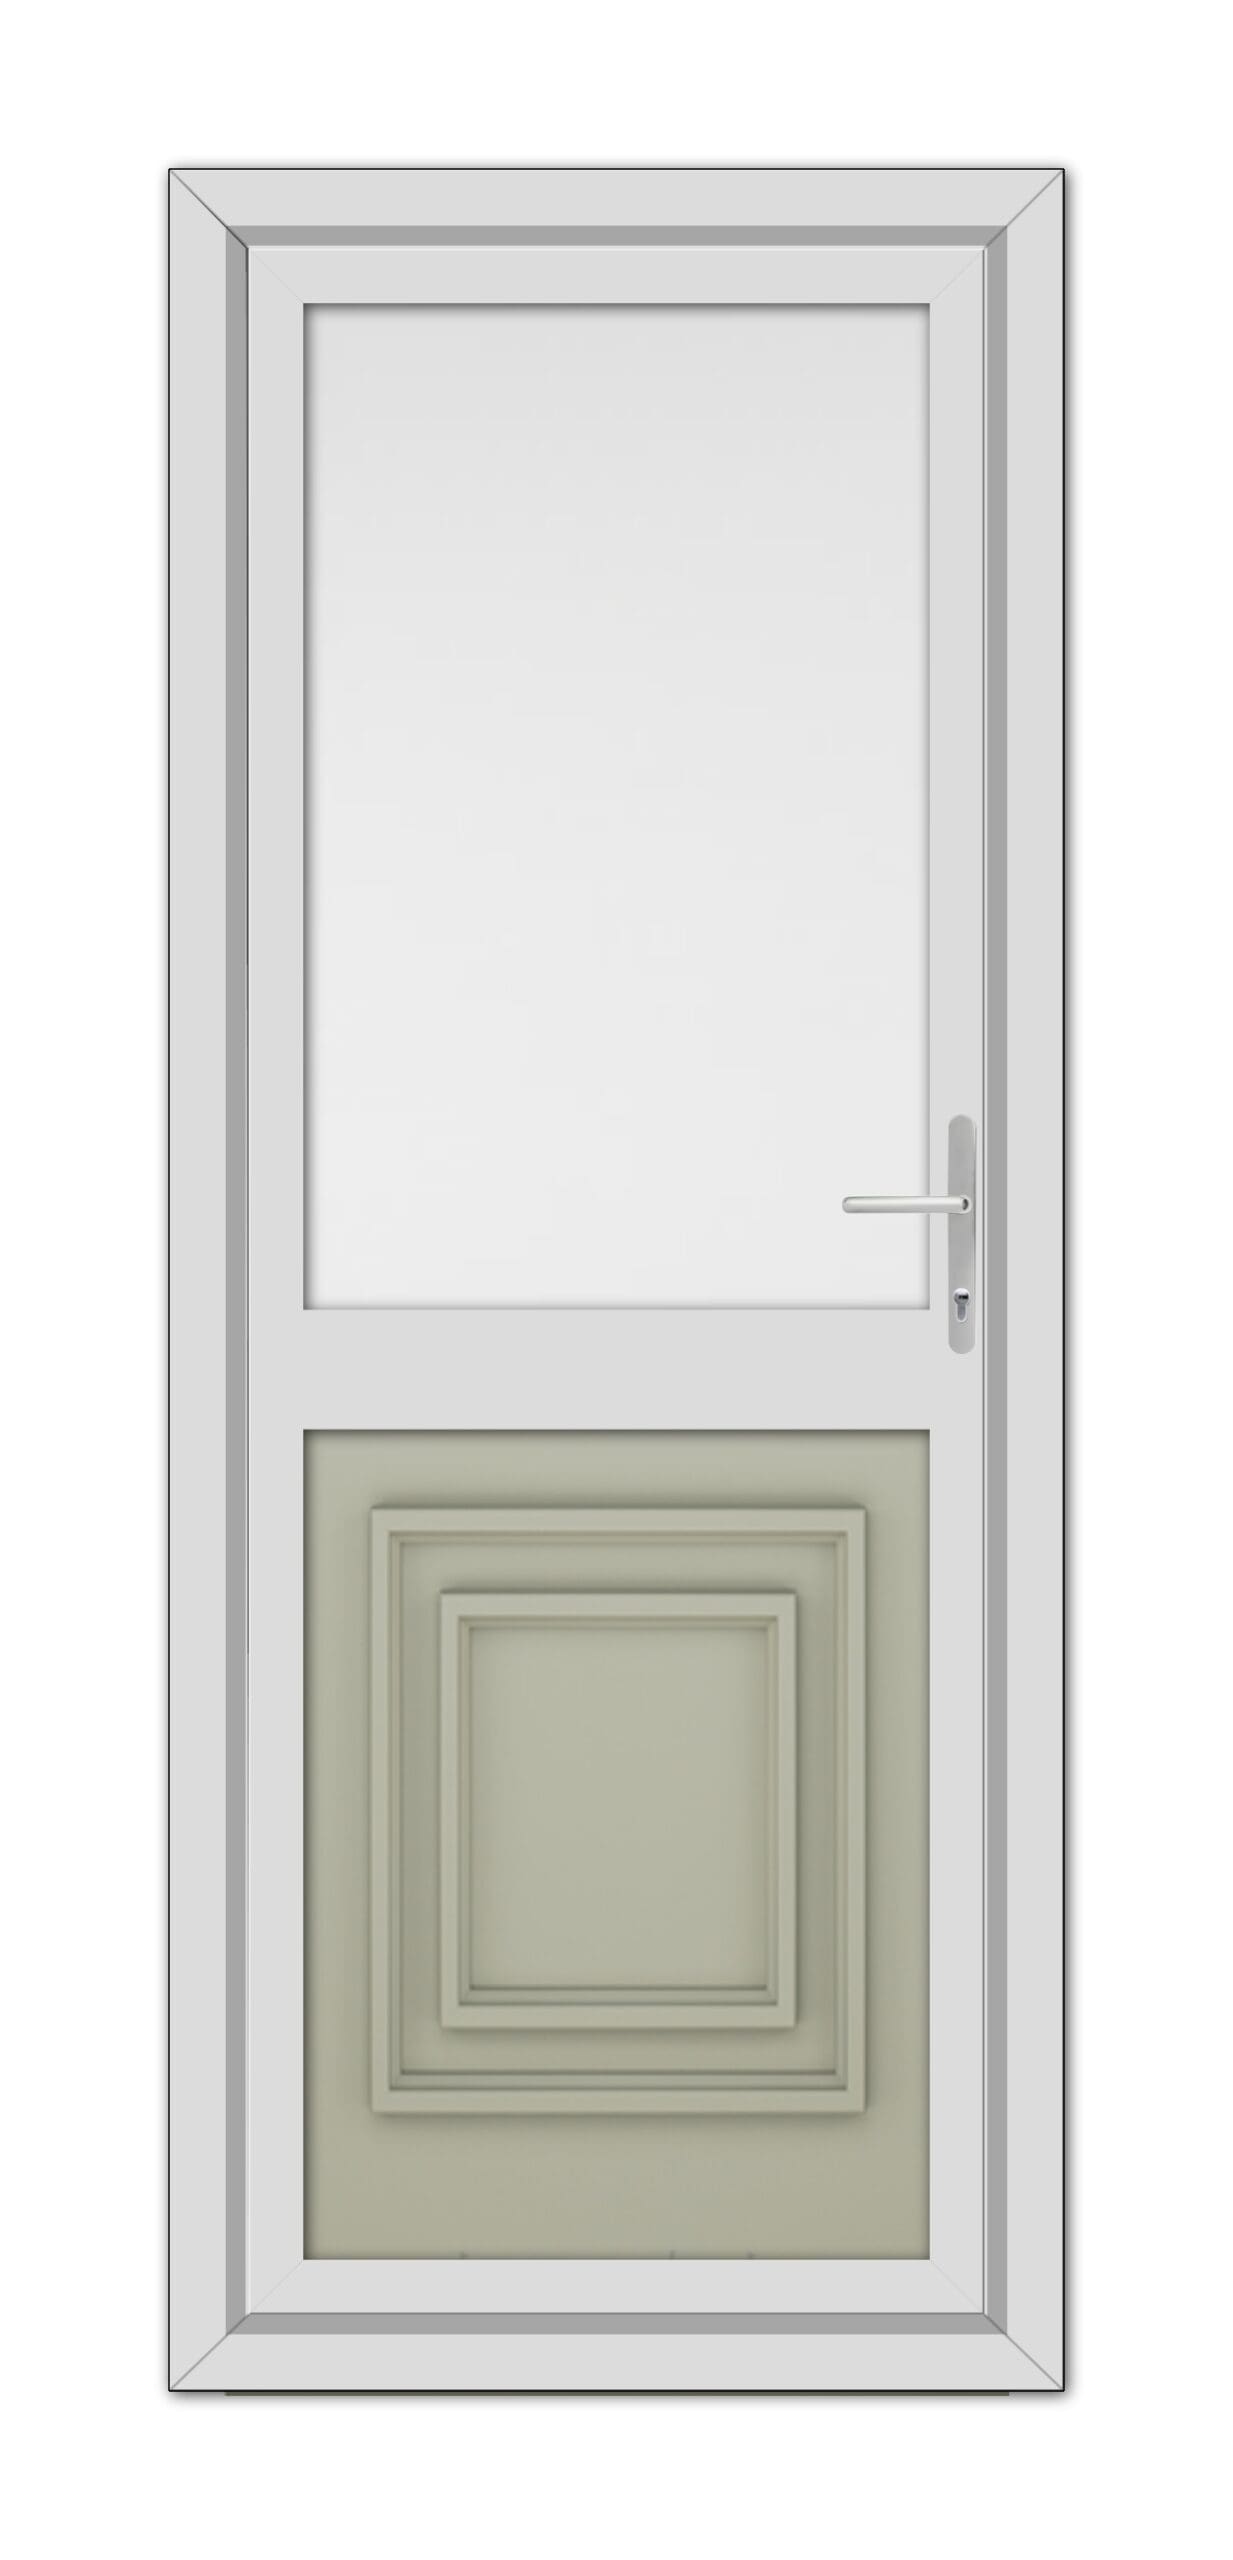 A modern Agate Grey Hannover Half uPVC back door with a top window and a centered raised panel, featuring a metal handle on the right side.